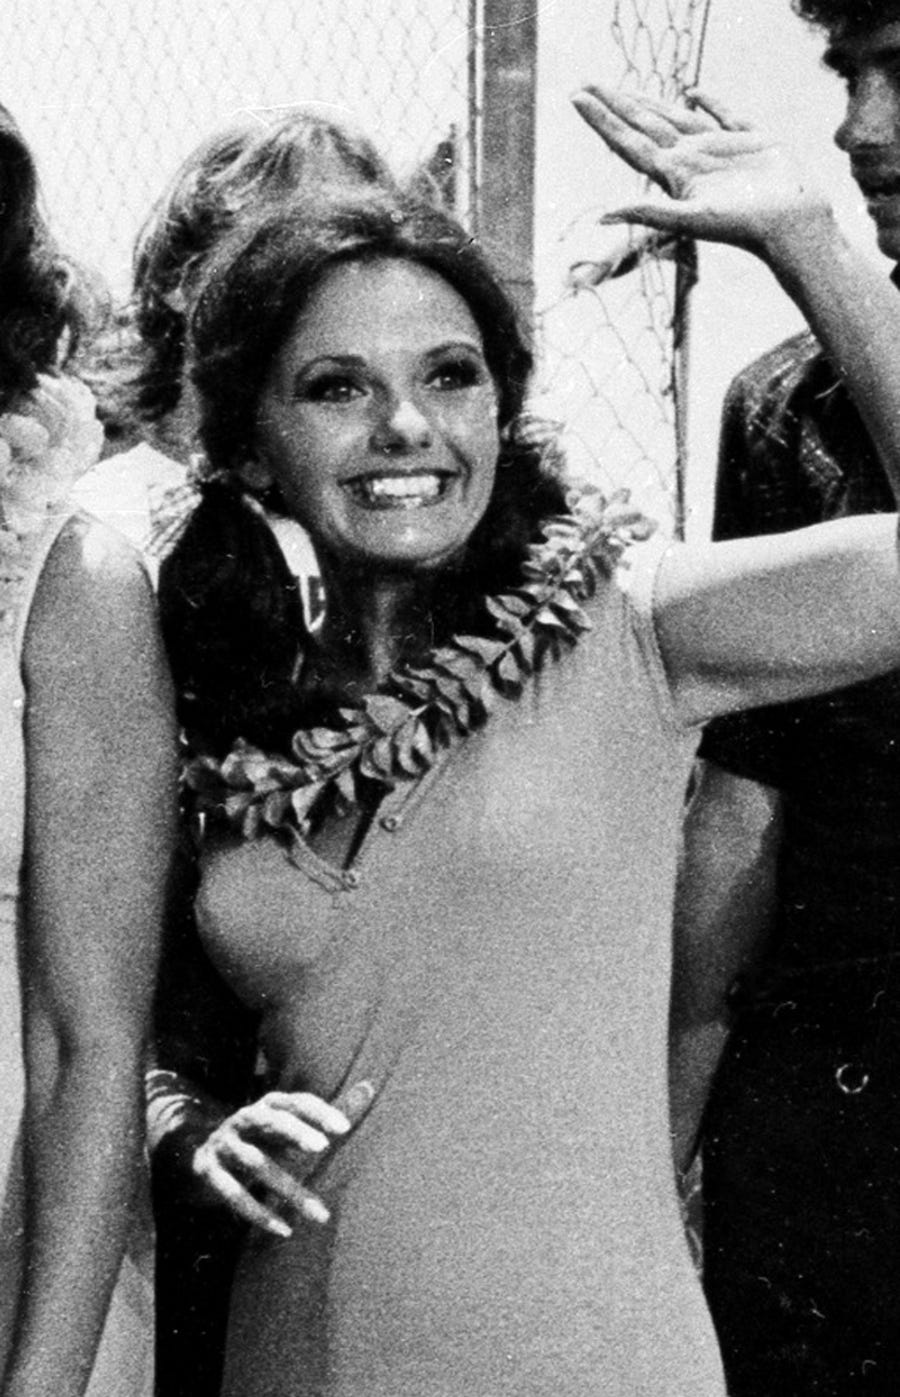 Dawn Wells returned to the role of eternal castaway Mary Ann in the two-hour reunion show, "The Return from Gilligan's Island," in 1978.